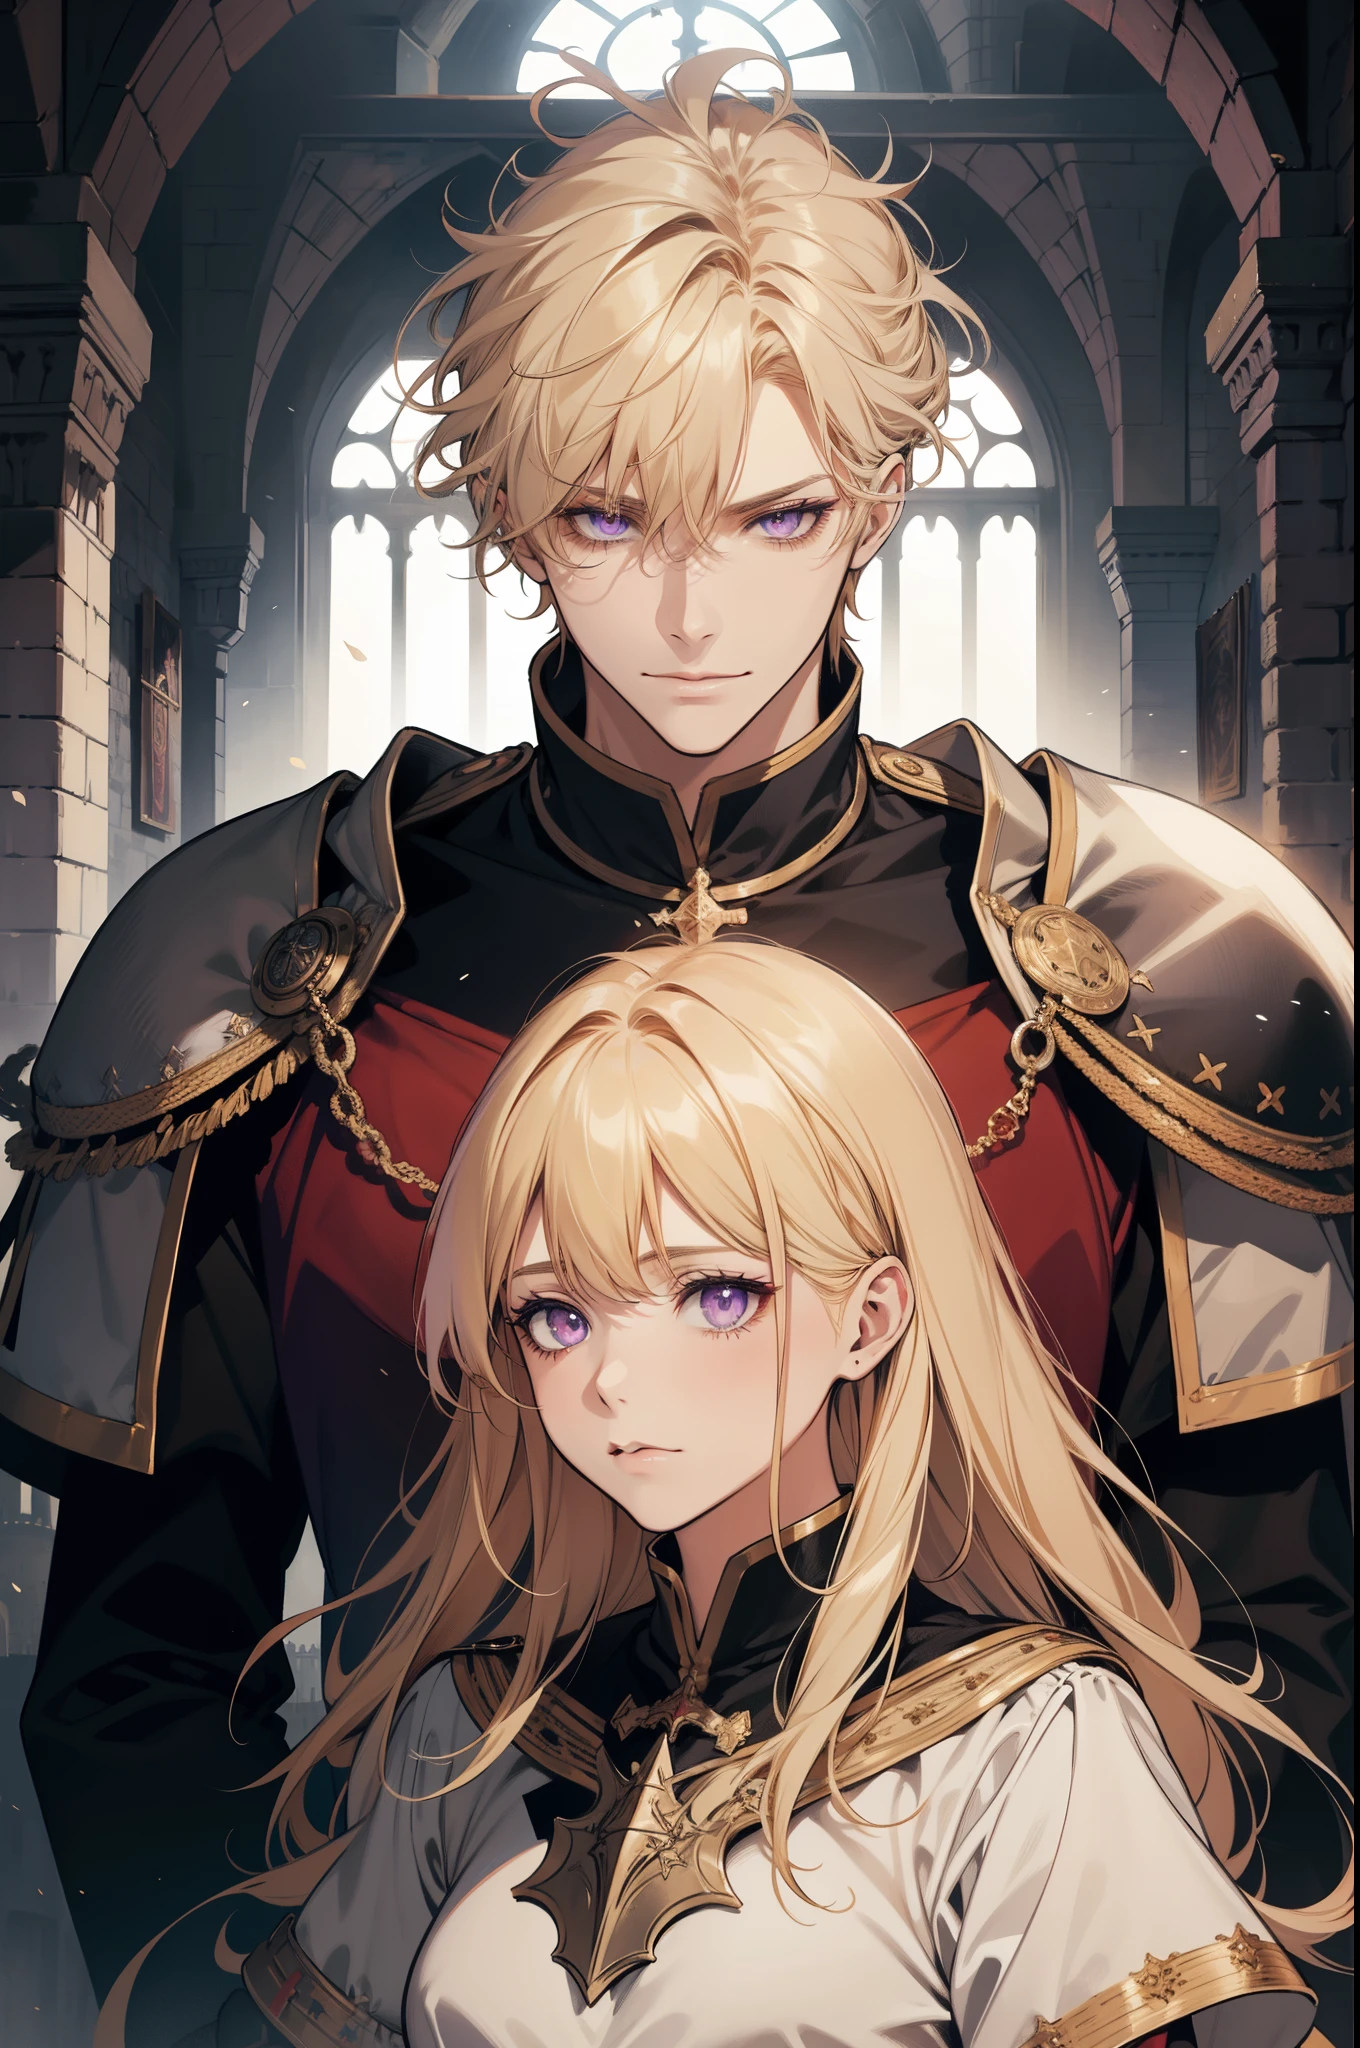 1 man, Blonde hair and blue eyes, prinz, chill out, guard, 1 Women, Black hair and purple eyes, The beautiful, DOA, in a castle, Medieval fantasy